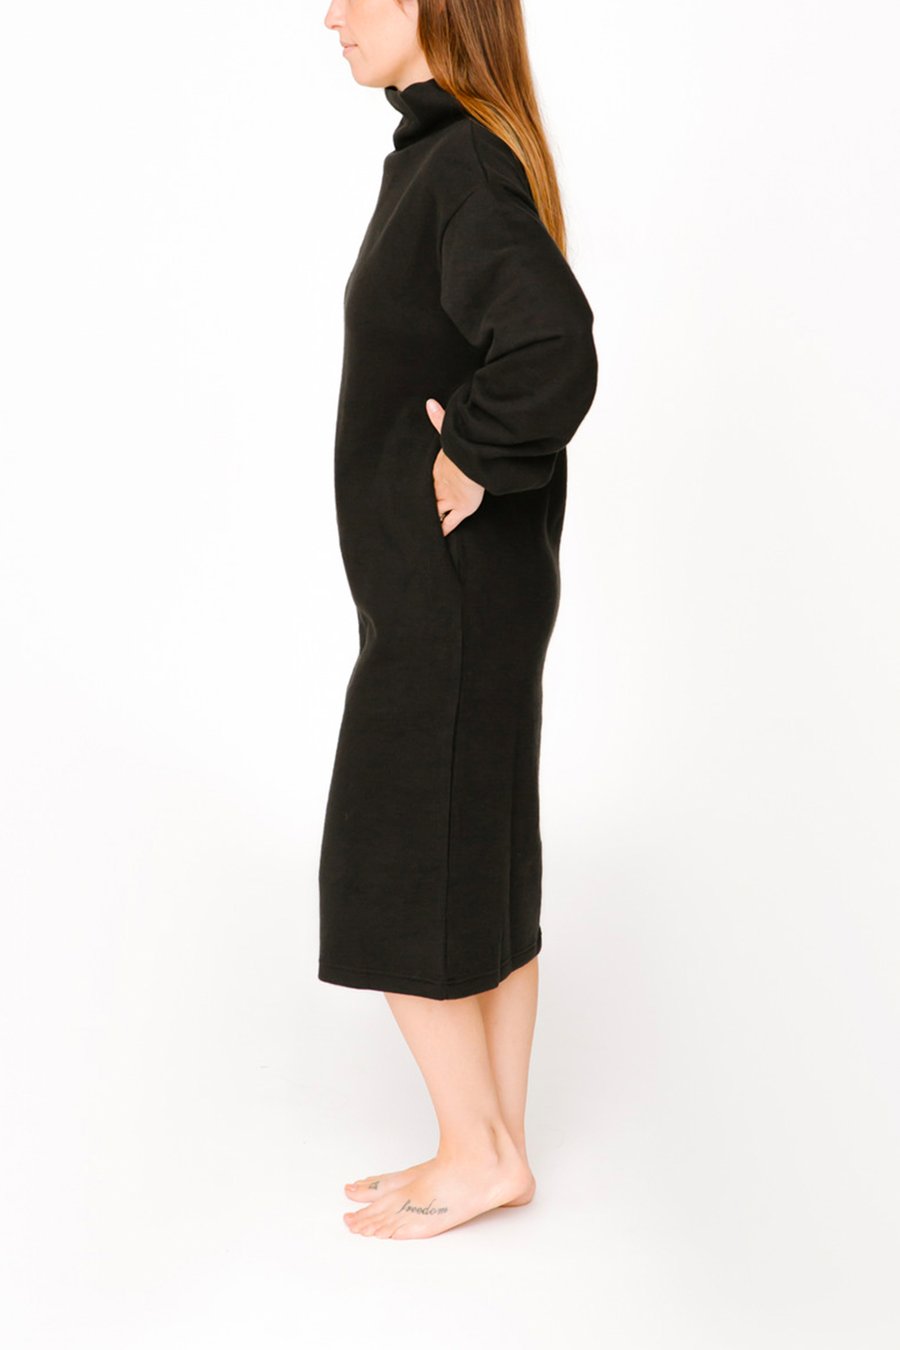 The sweater Dress In Midnight Black | Smash + Tess - Clearance